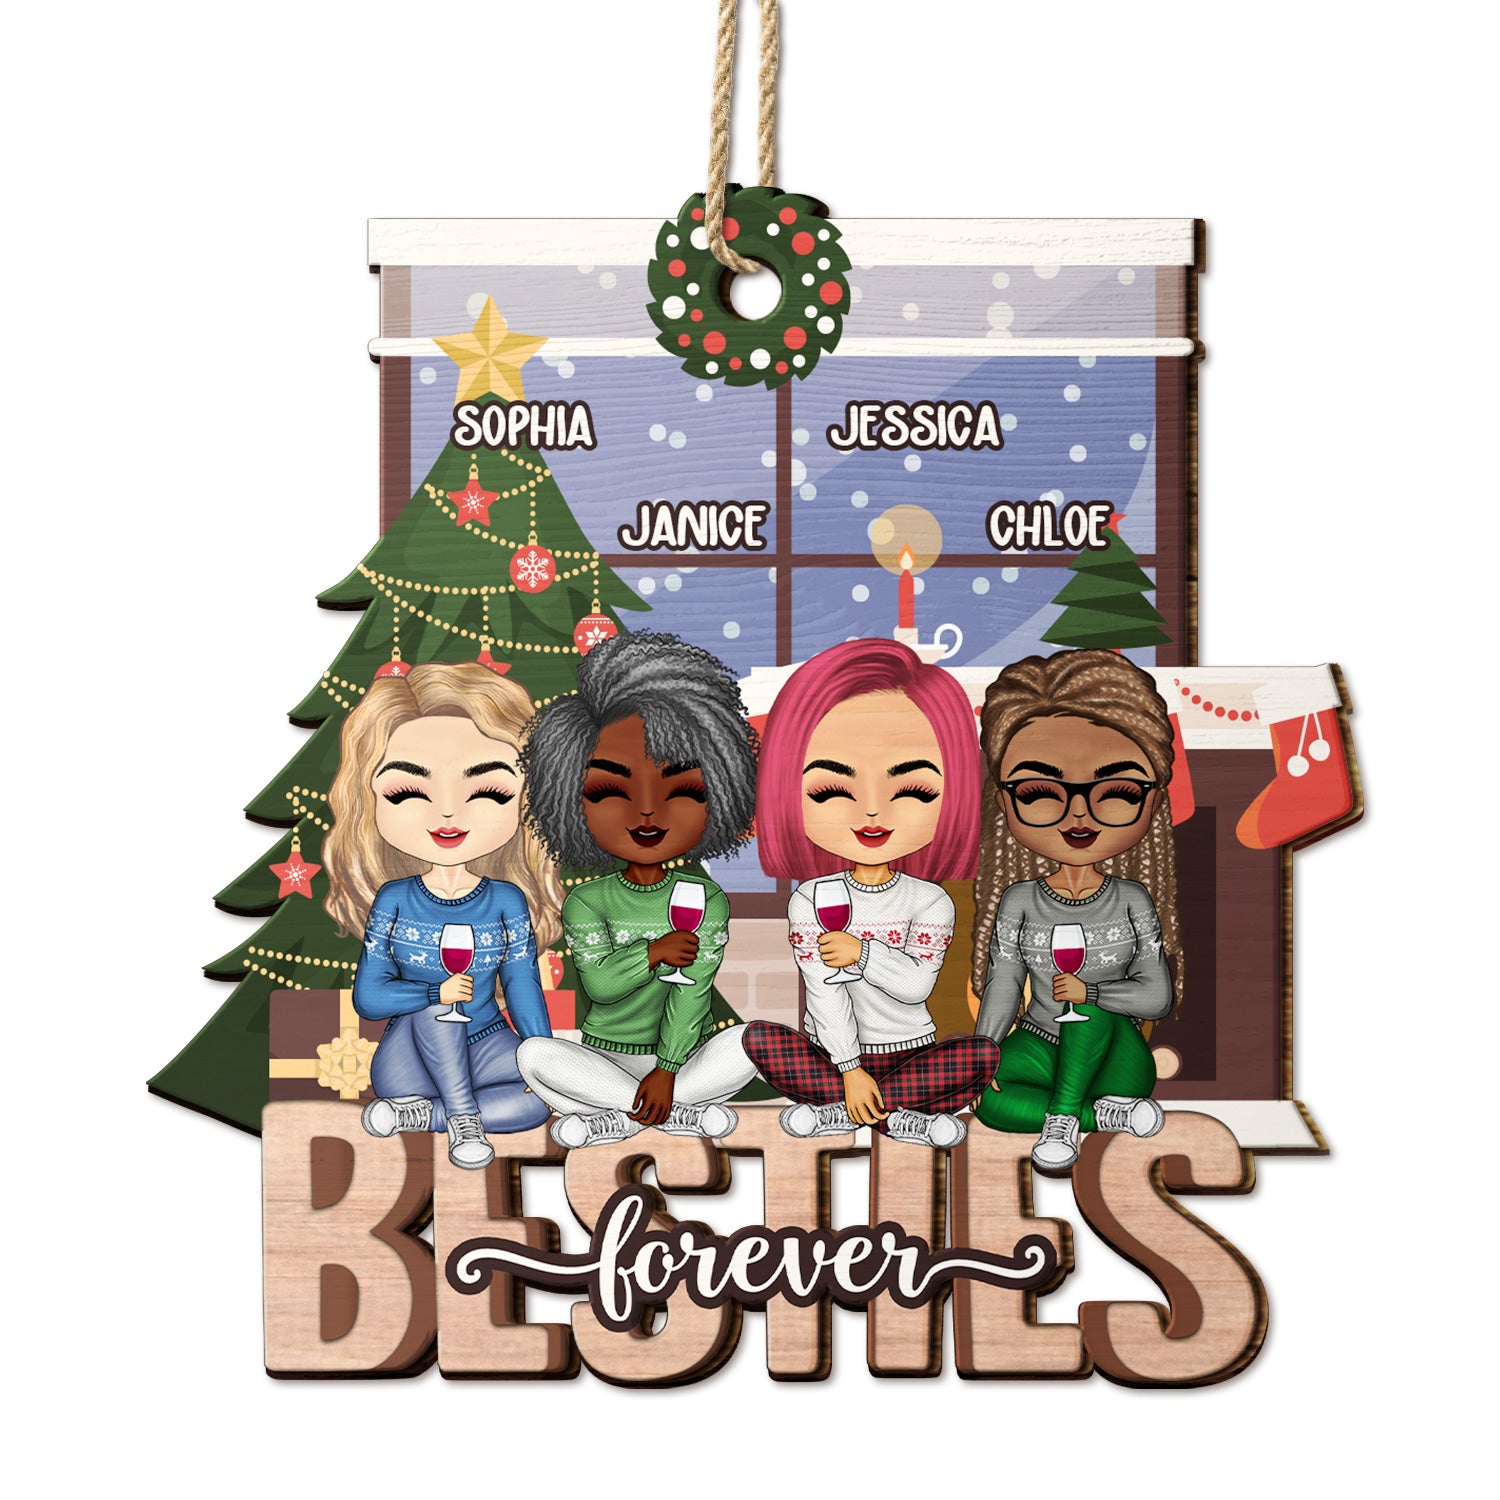 Bestie Forever - Christmas Gift For Best Friends, Colleagues, Sibling, Family - Personalized Wooden Cutout Ornament